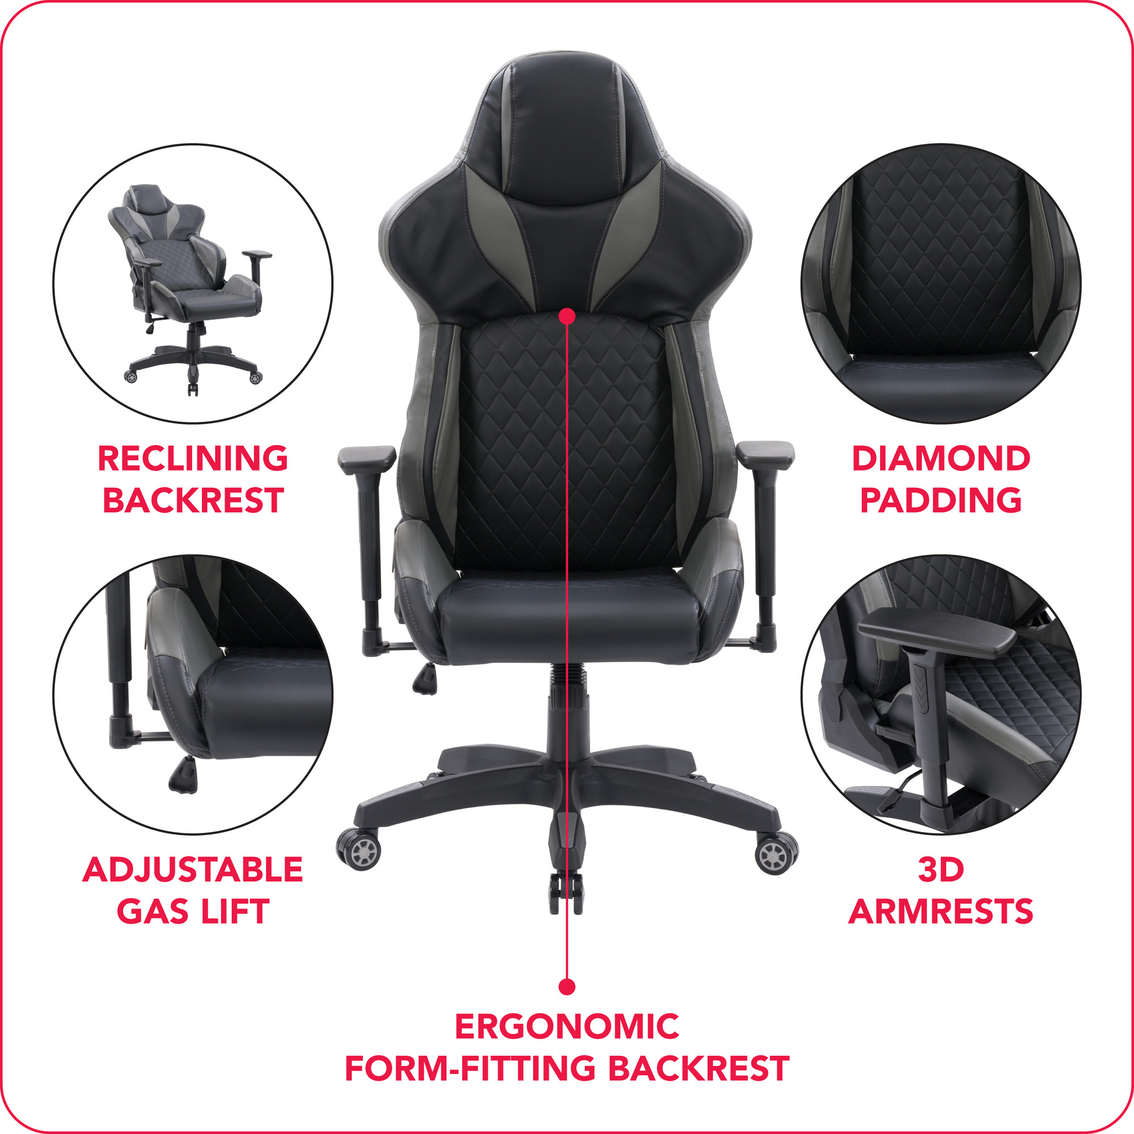 CorLiving Nightshade Gaming Chair - Image 8 of 8